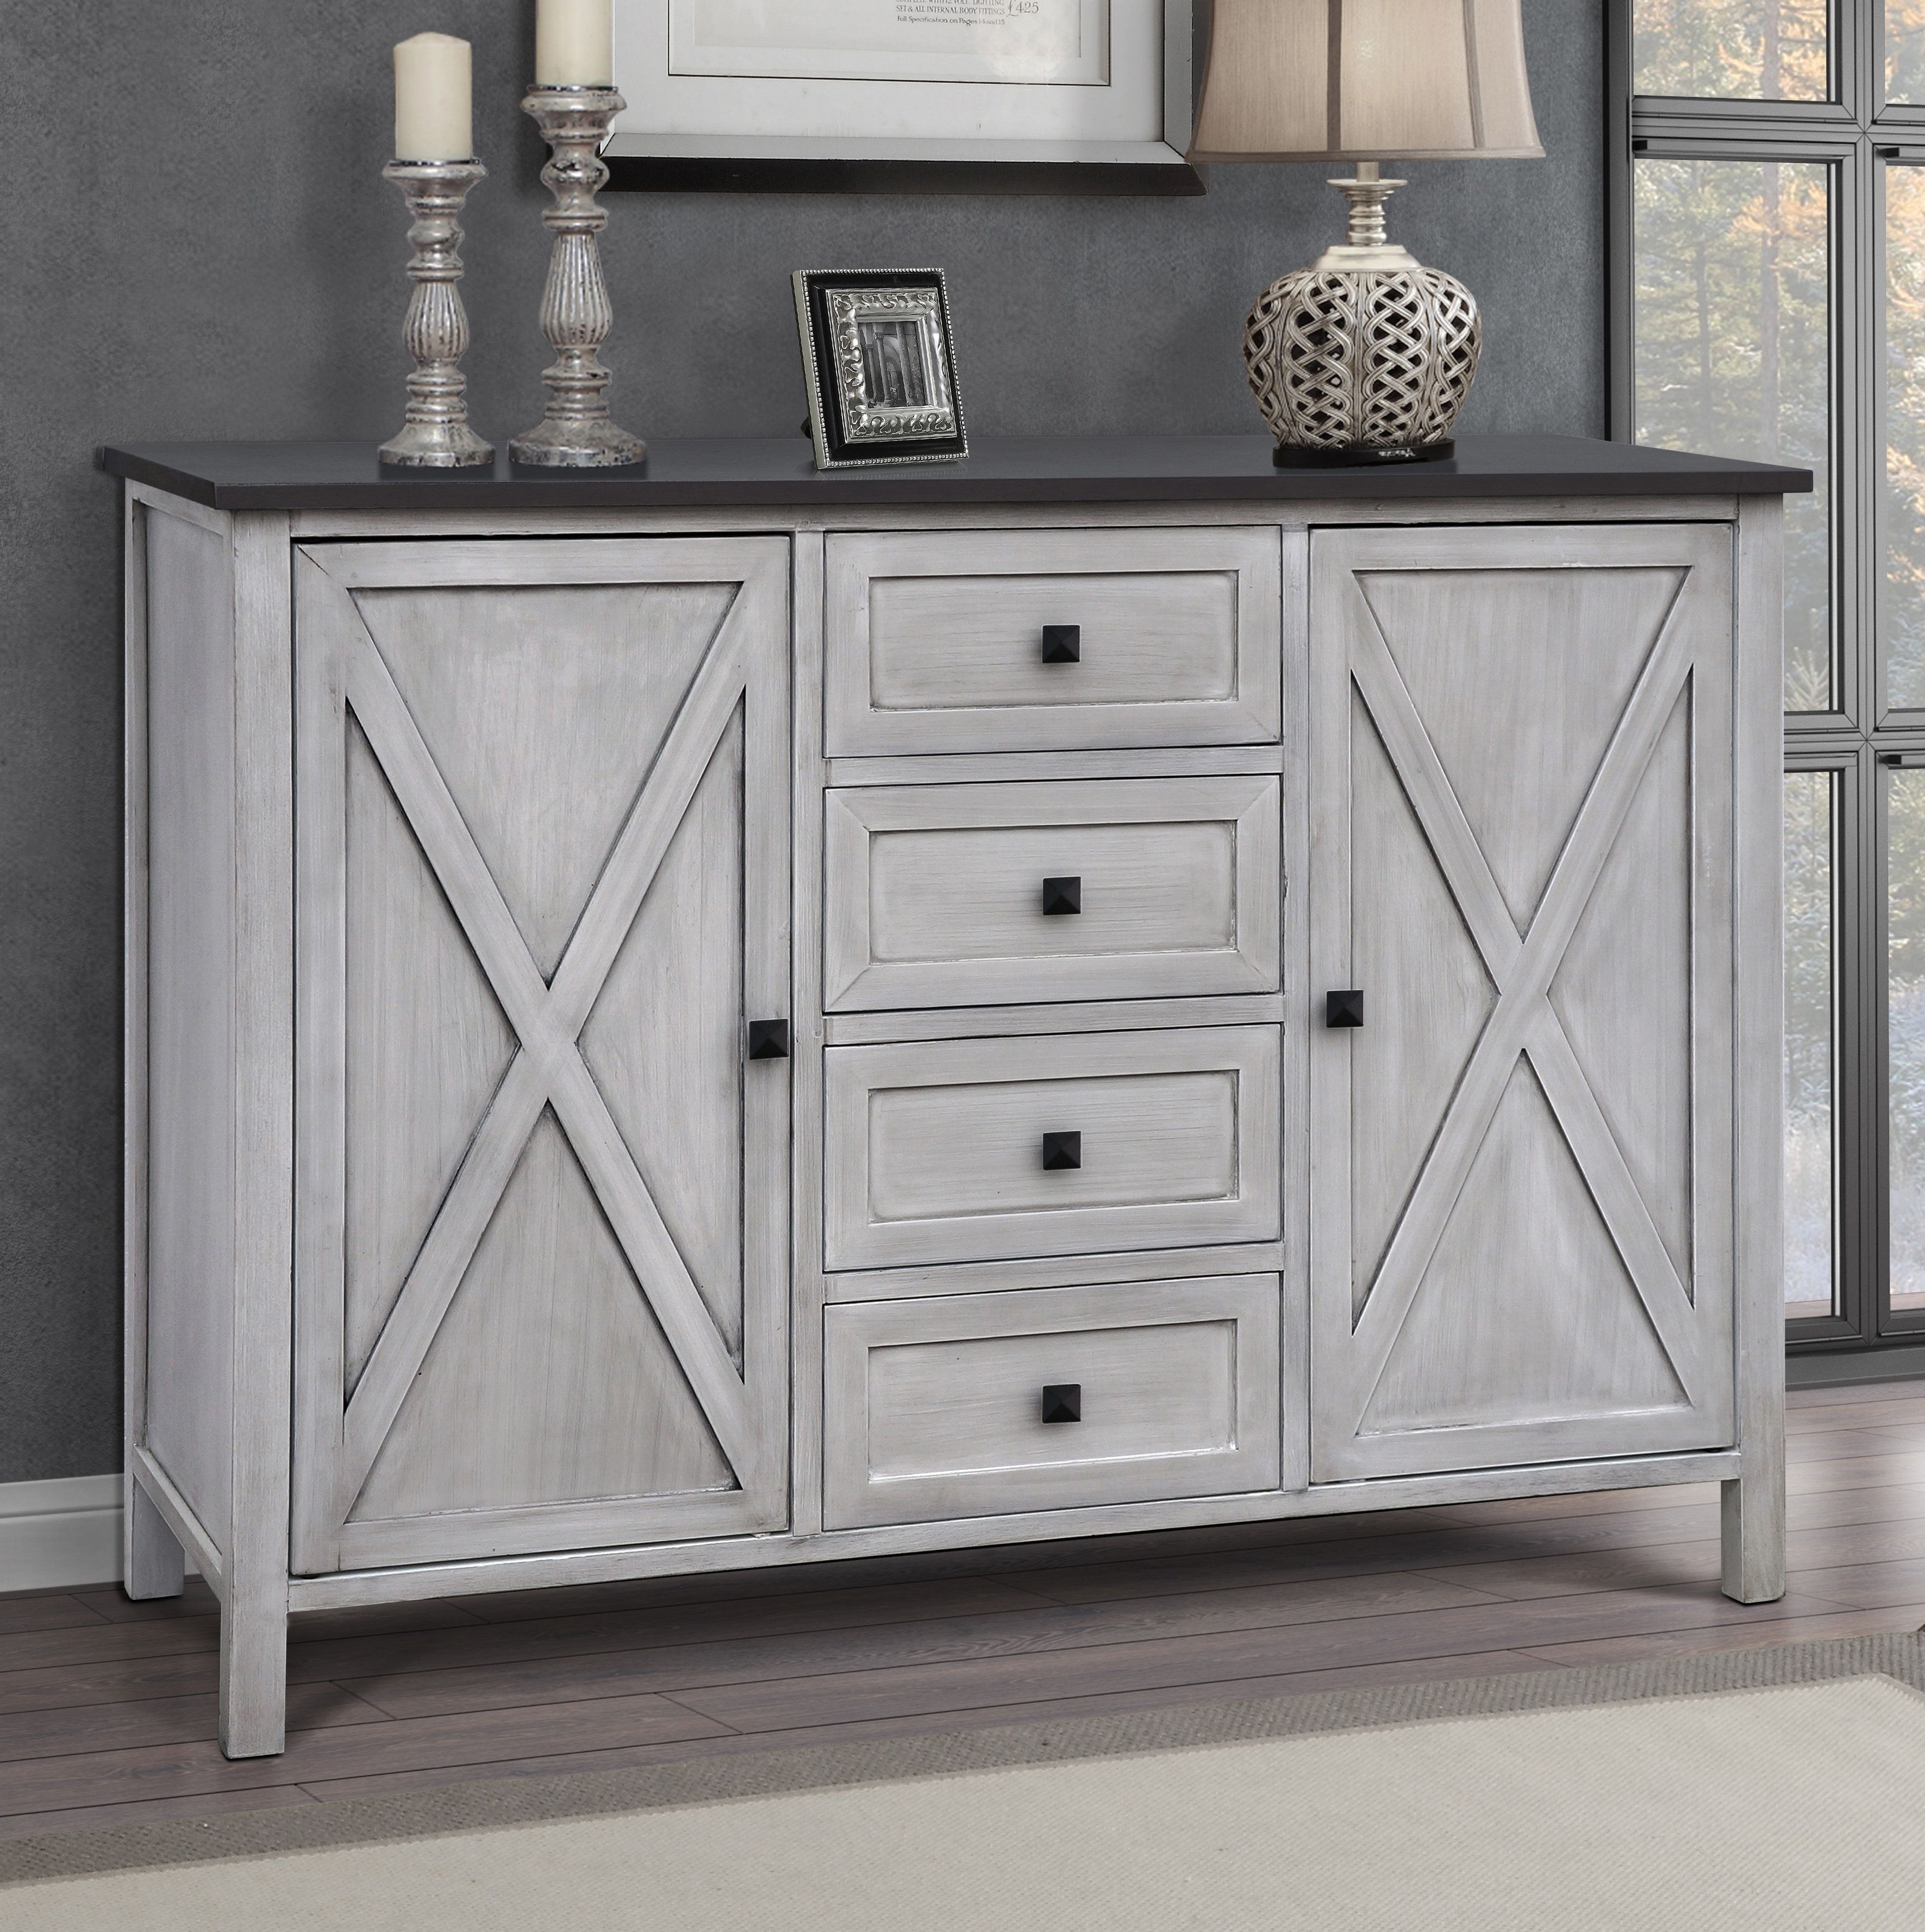 Lamb Farmhouse 4 Drawer 2 Door Accent Cabinet | Birch Lane Within 4 Door 4 Drawer Metal Inserts Sideboards (Photo 11 of 30)